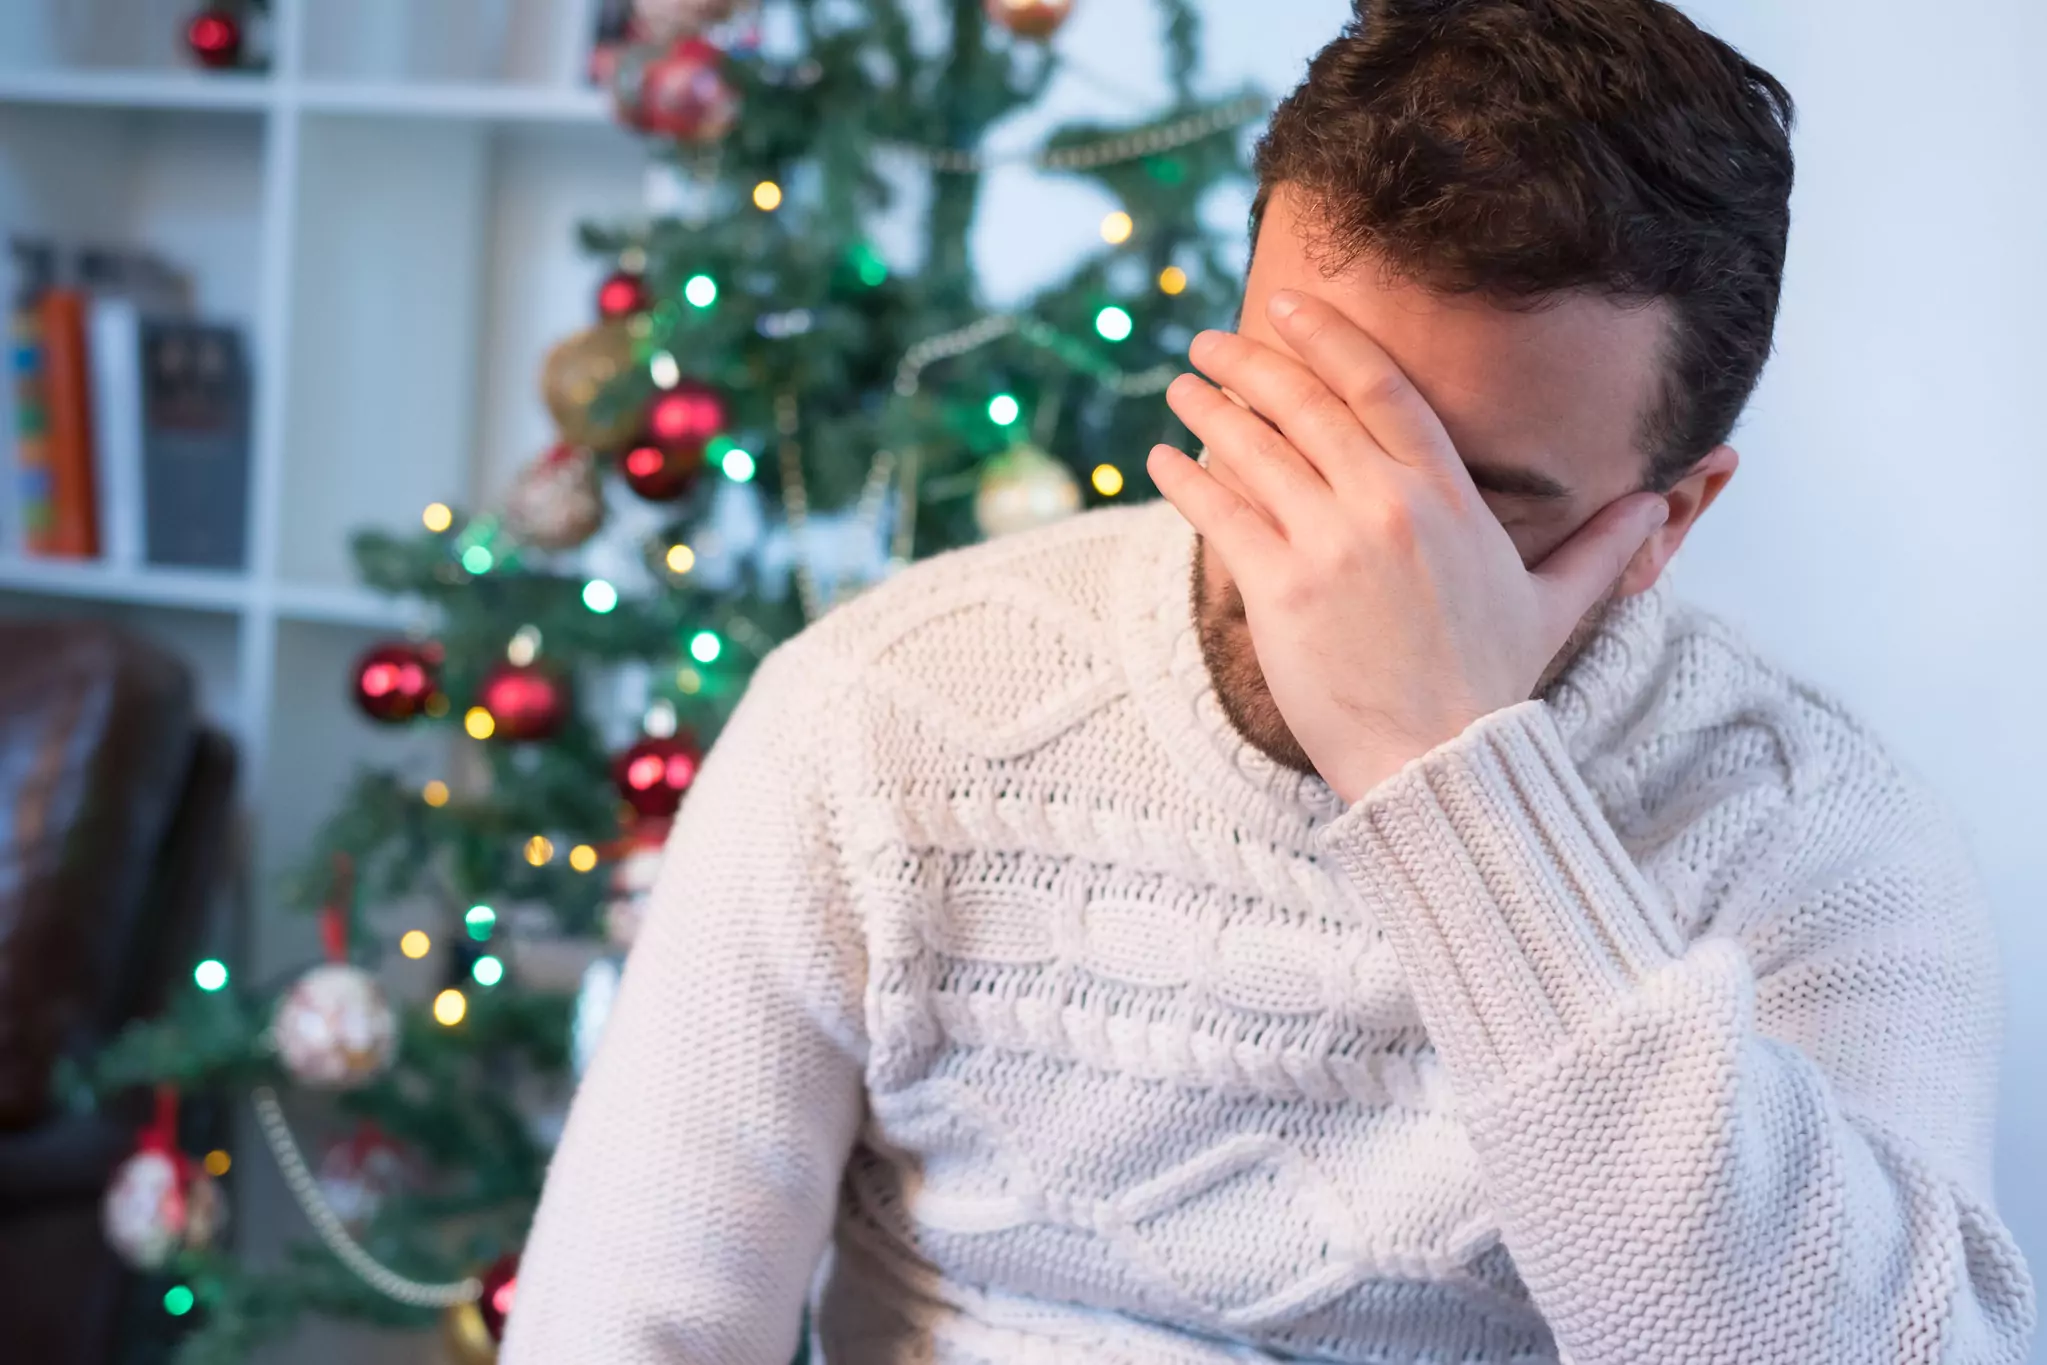 Man feeling depressed, wearing a white sweater and holding his head in his hand while sitting in front of a Christmas tree.